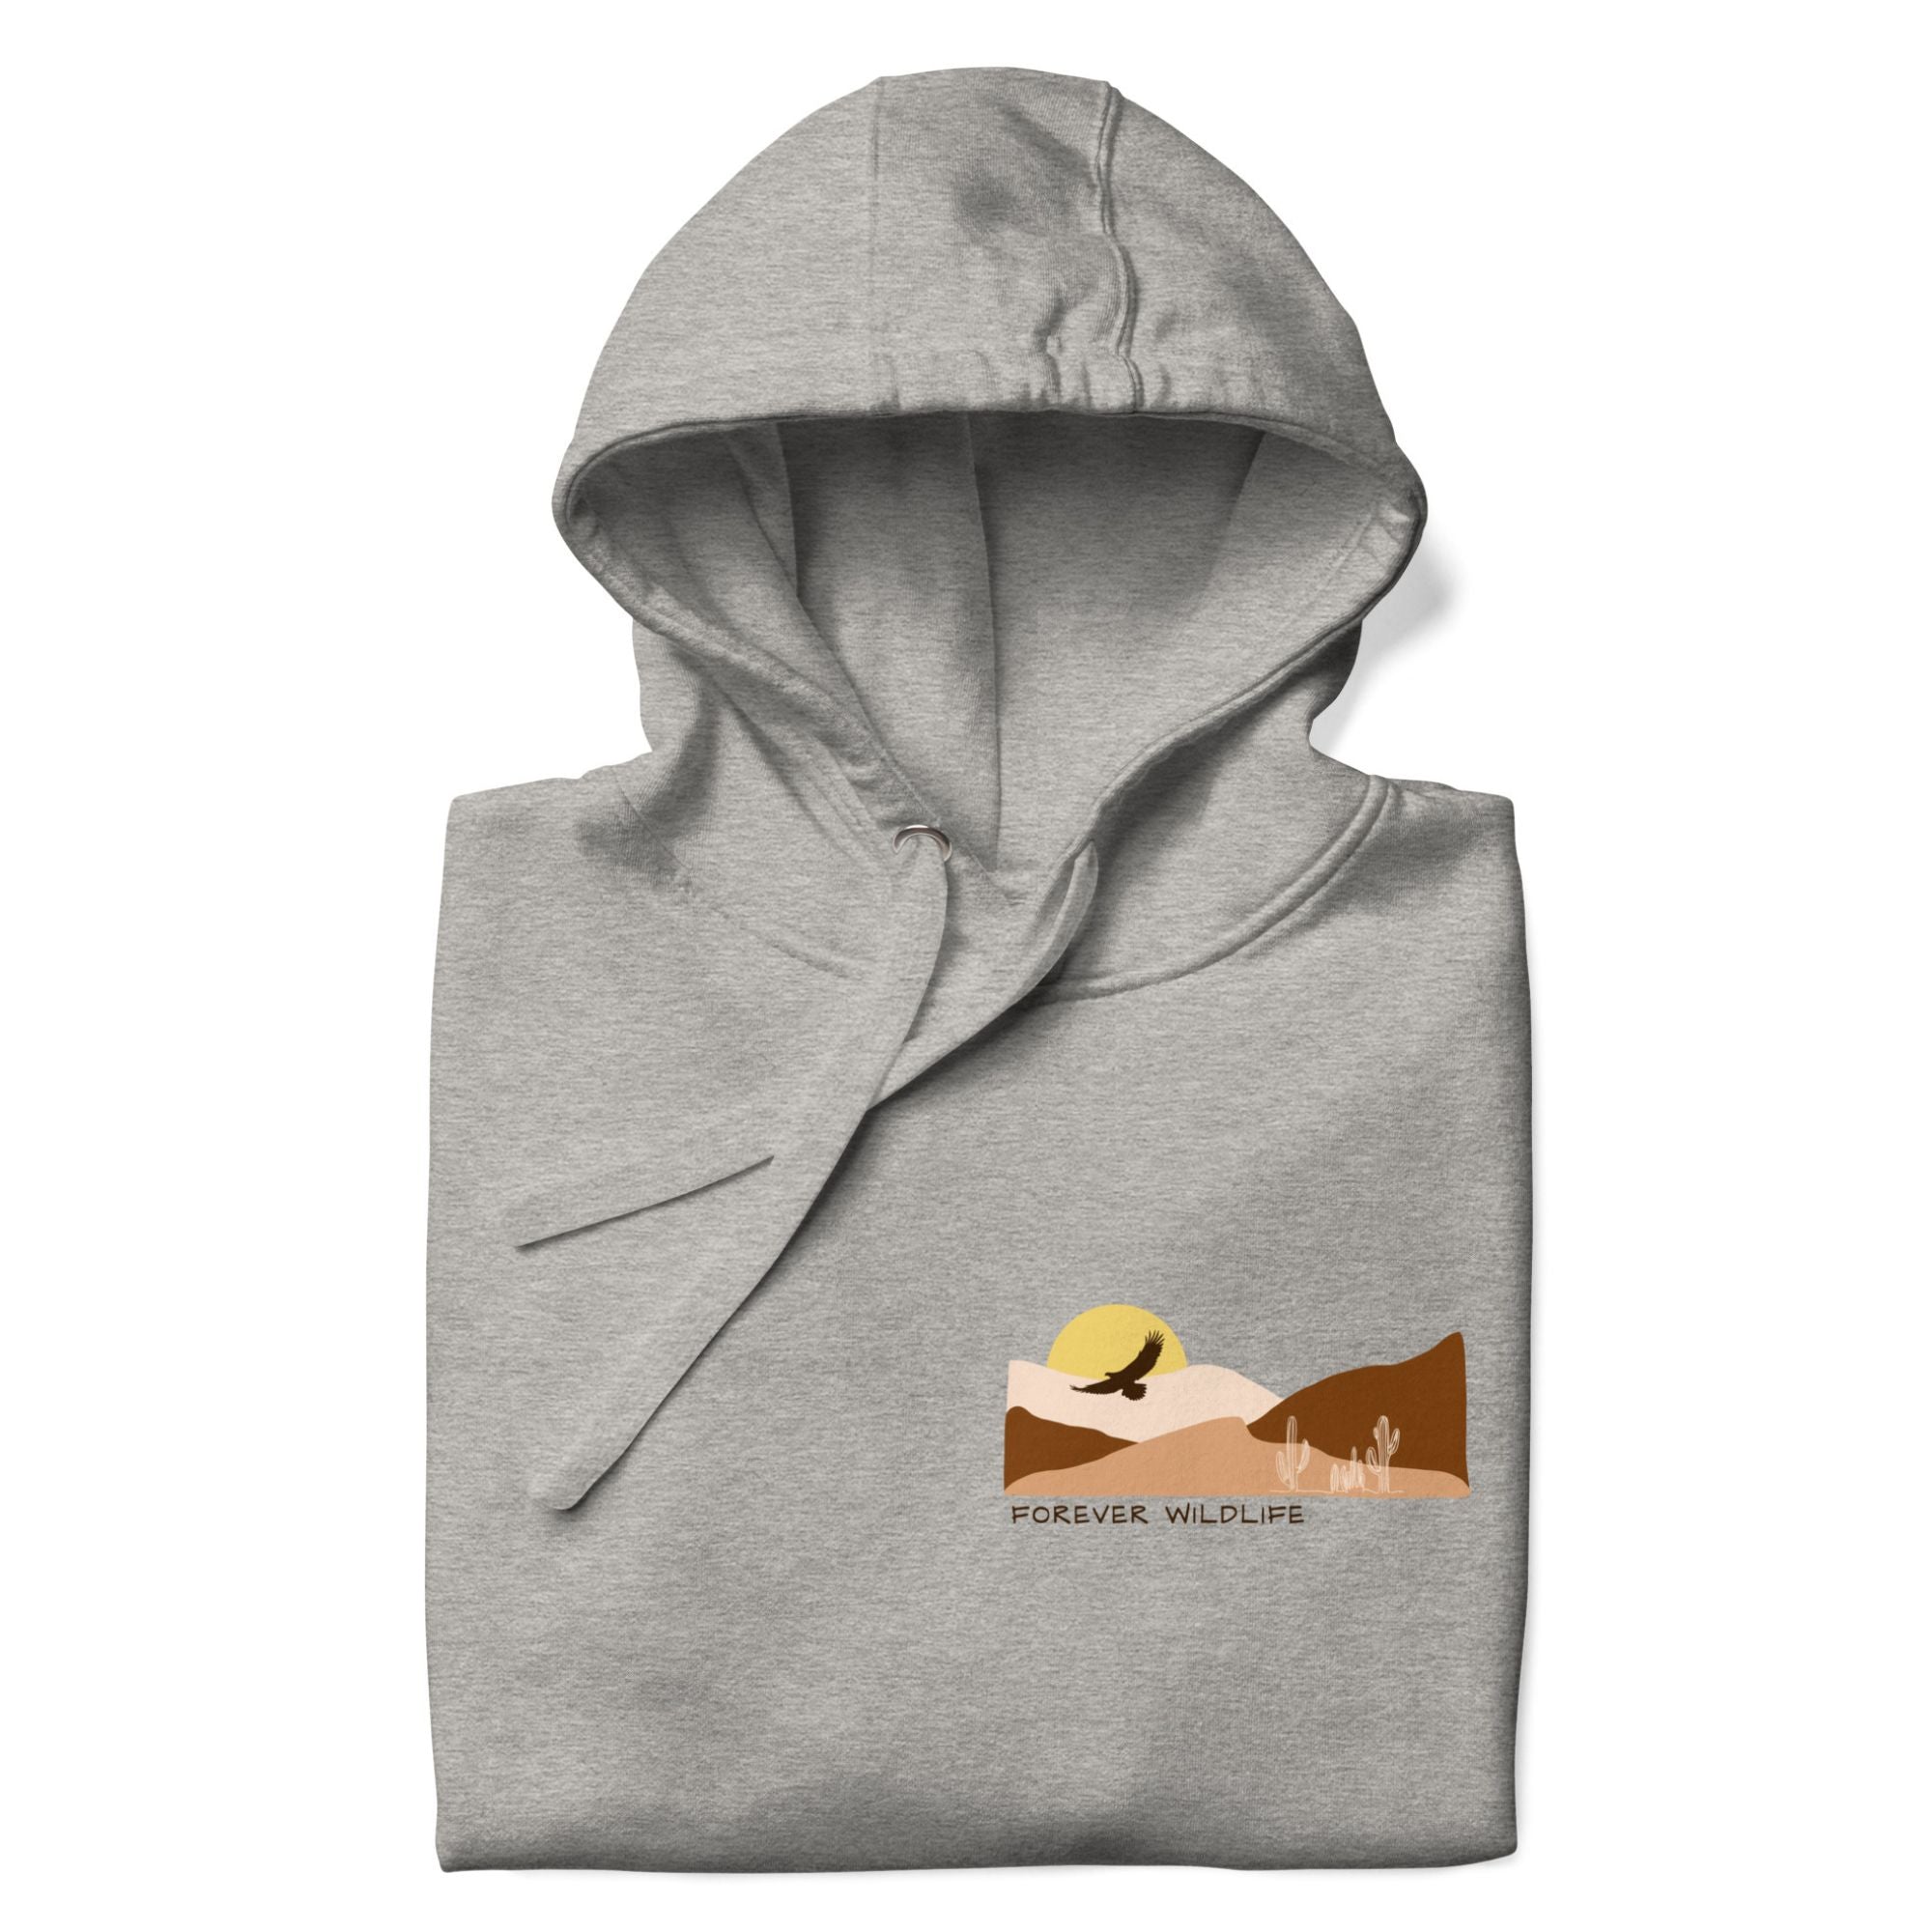  Eagle Hoodie, beautiful grey Eagle hoodie with eagle soaring over the desert part of Wildlife Hoodies collection.